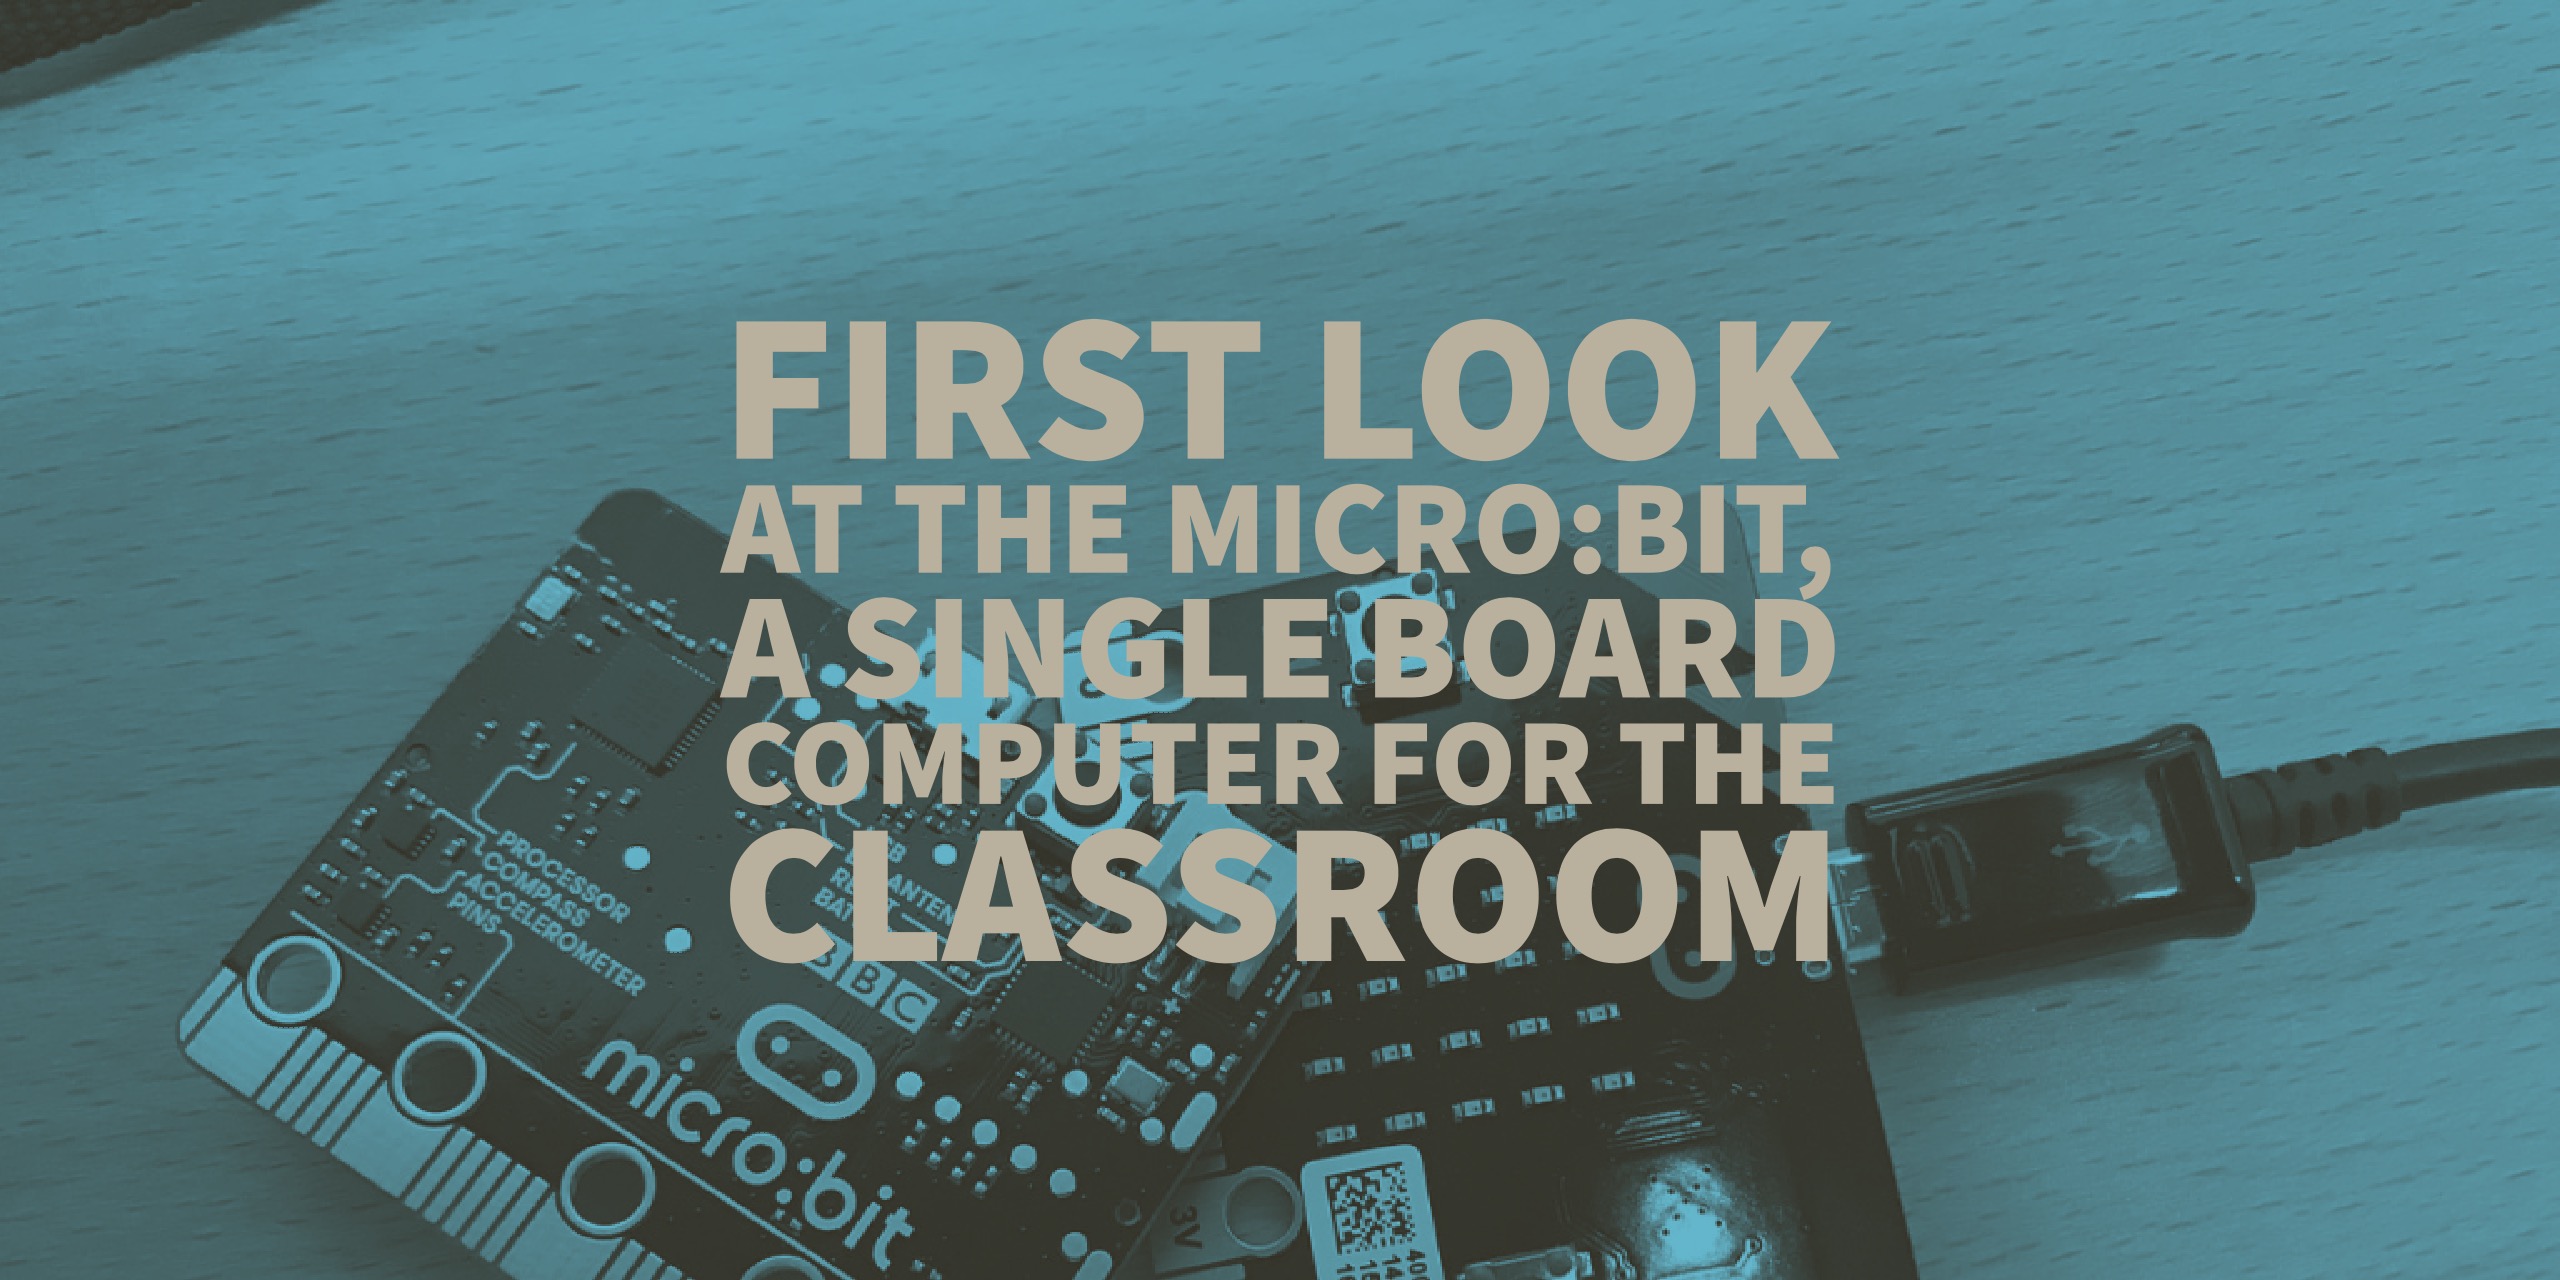 First look at the micro:bit, a single board computer for the classroom